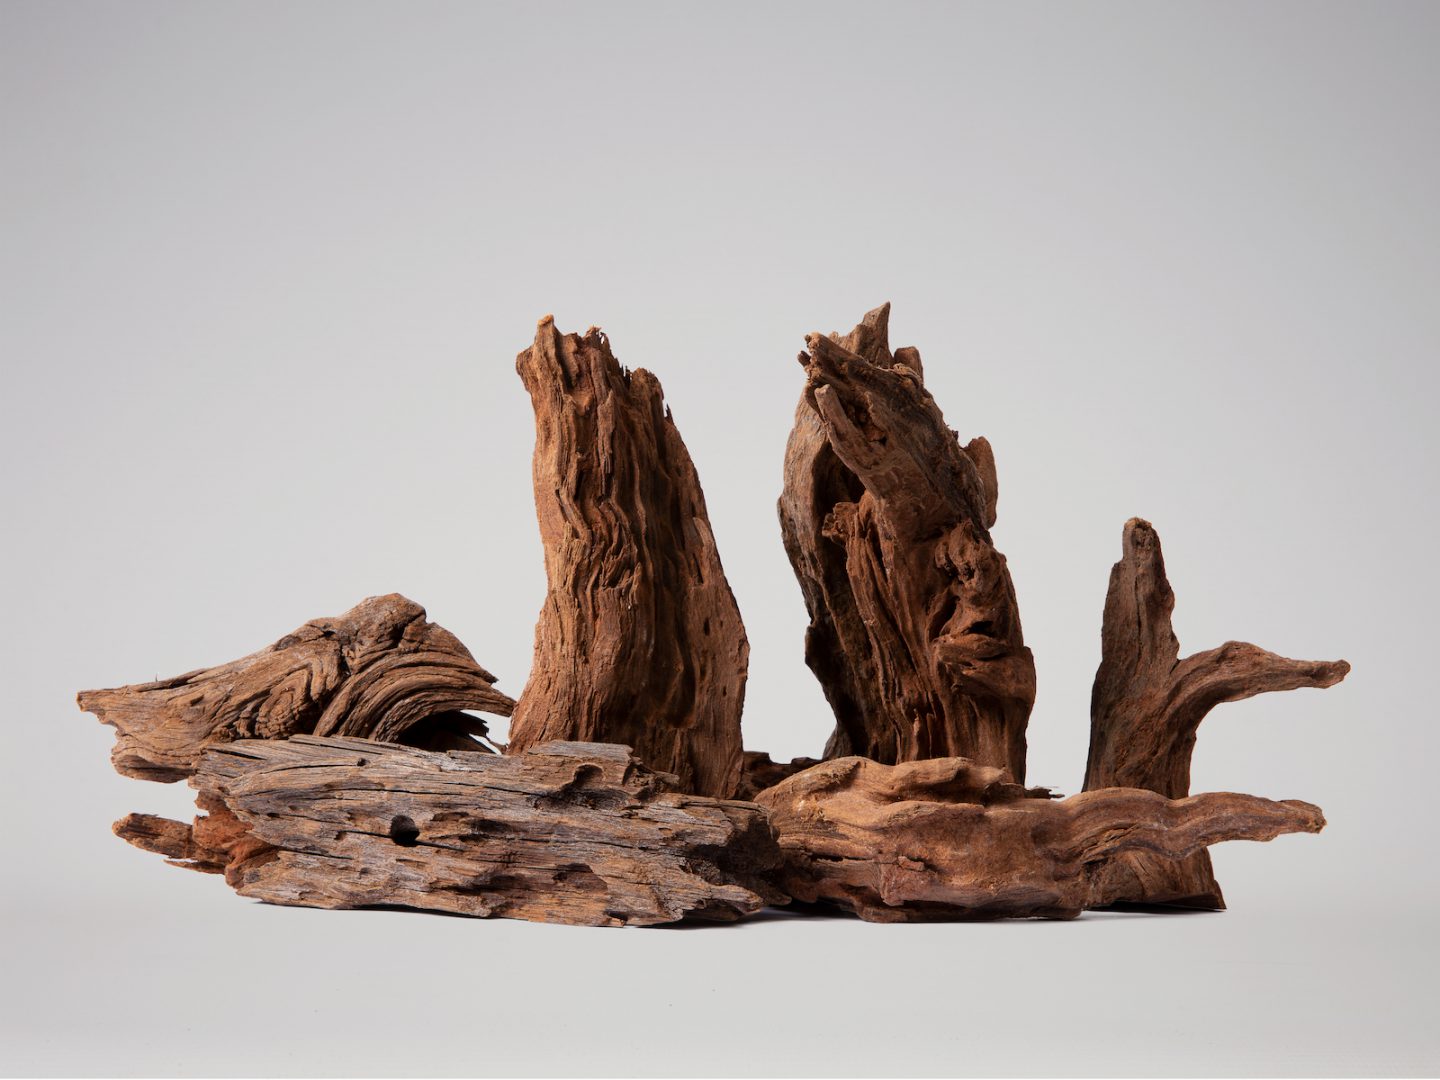 driftwood on an white background